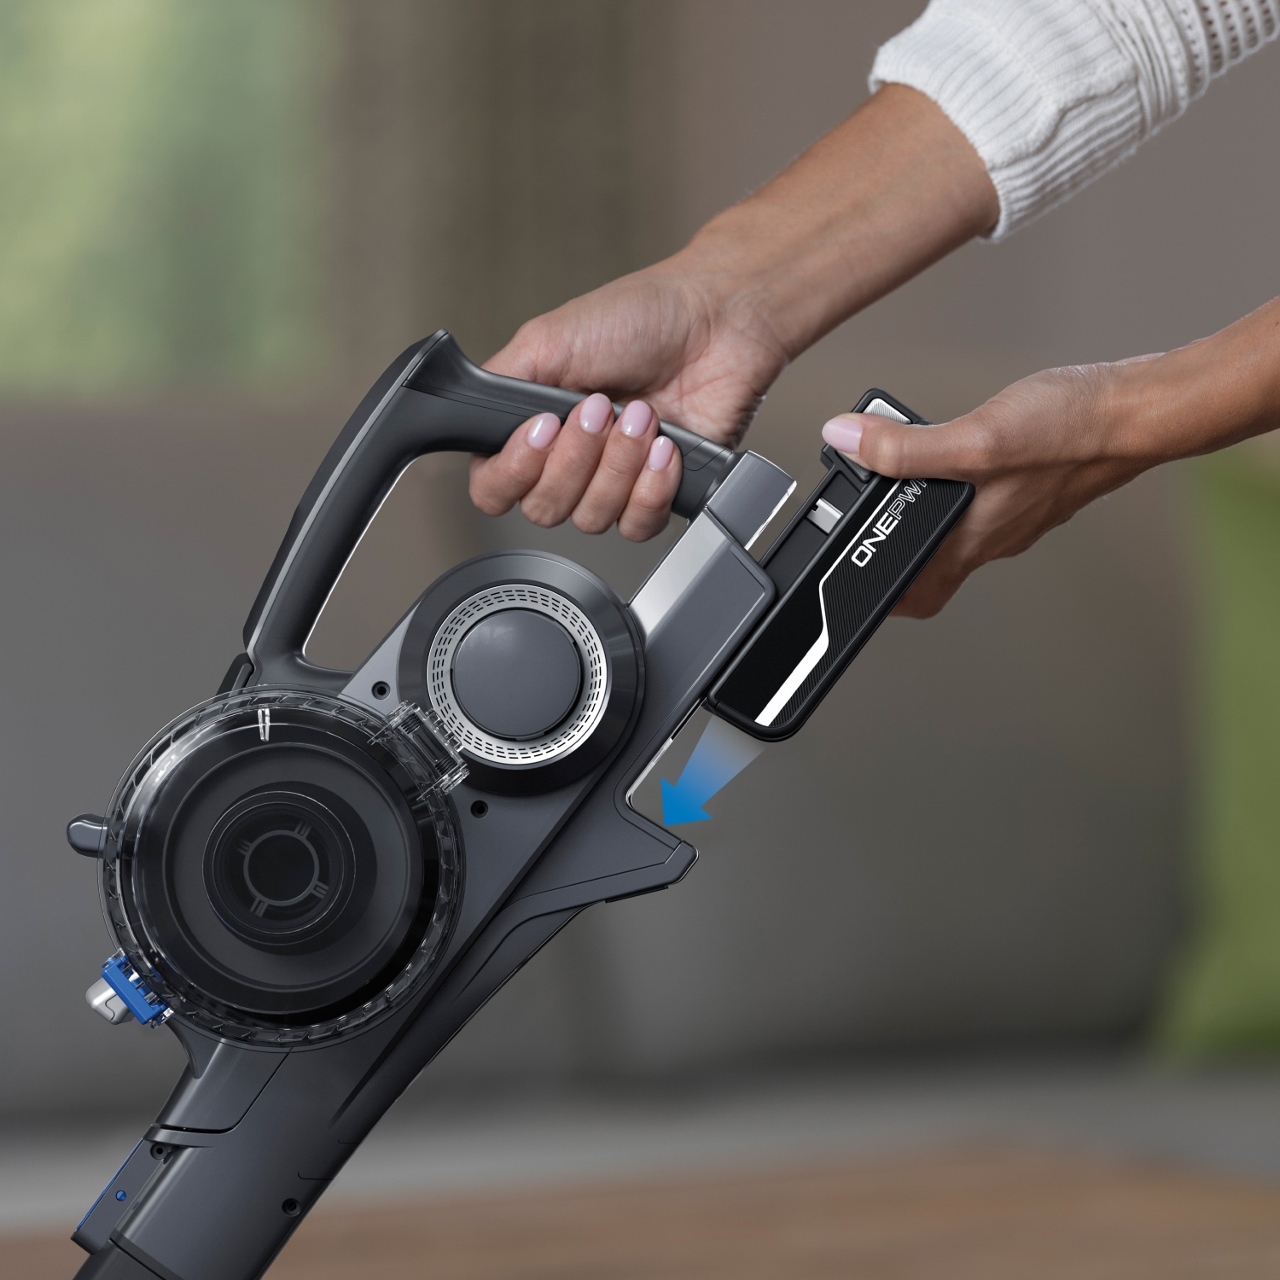 HOOVER Blade, with a removable battery, provides fast and easy cleaning around the home.